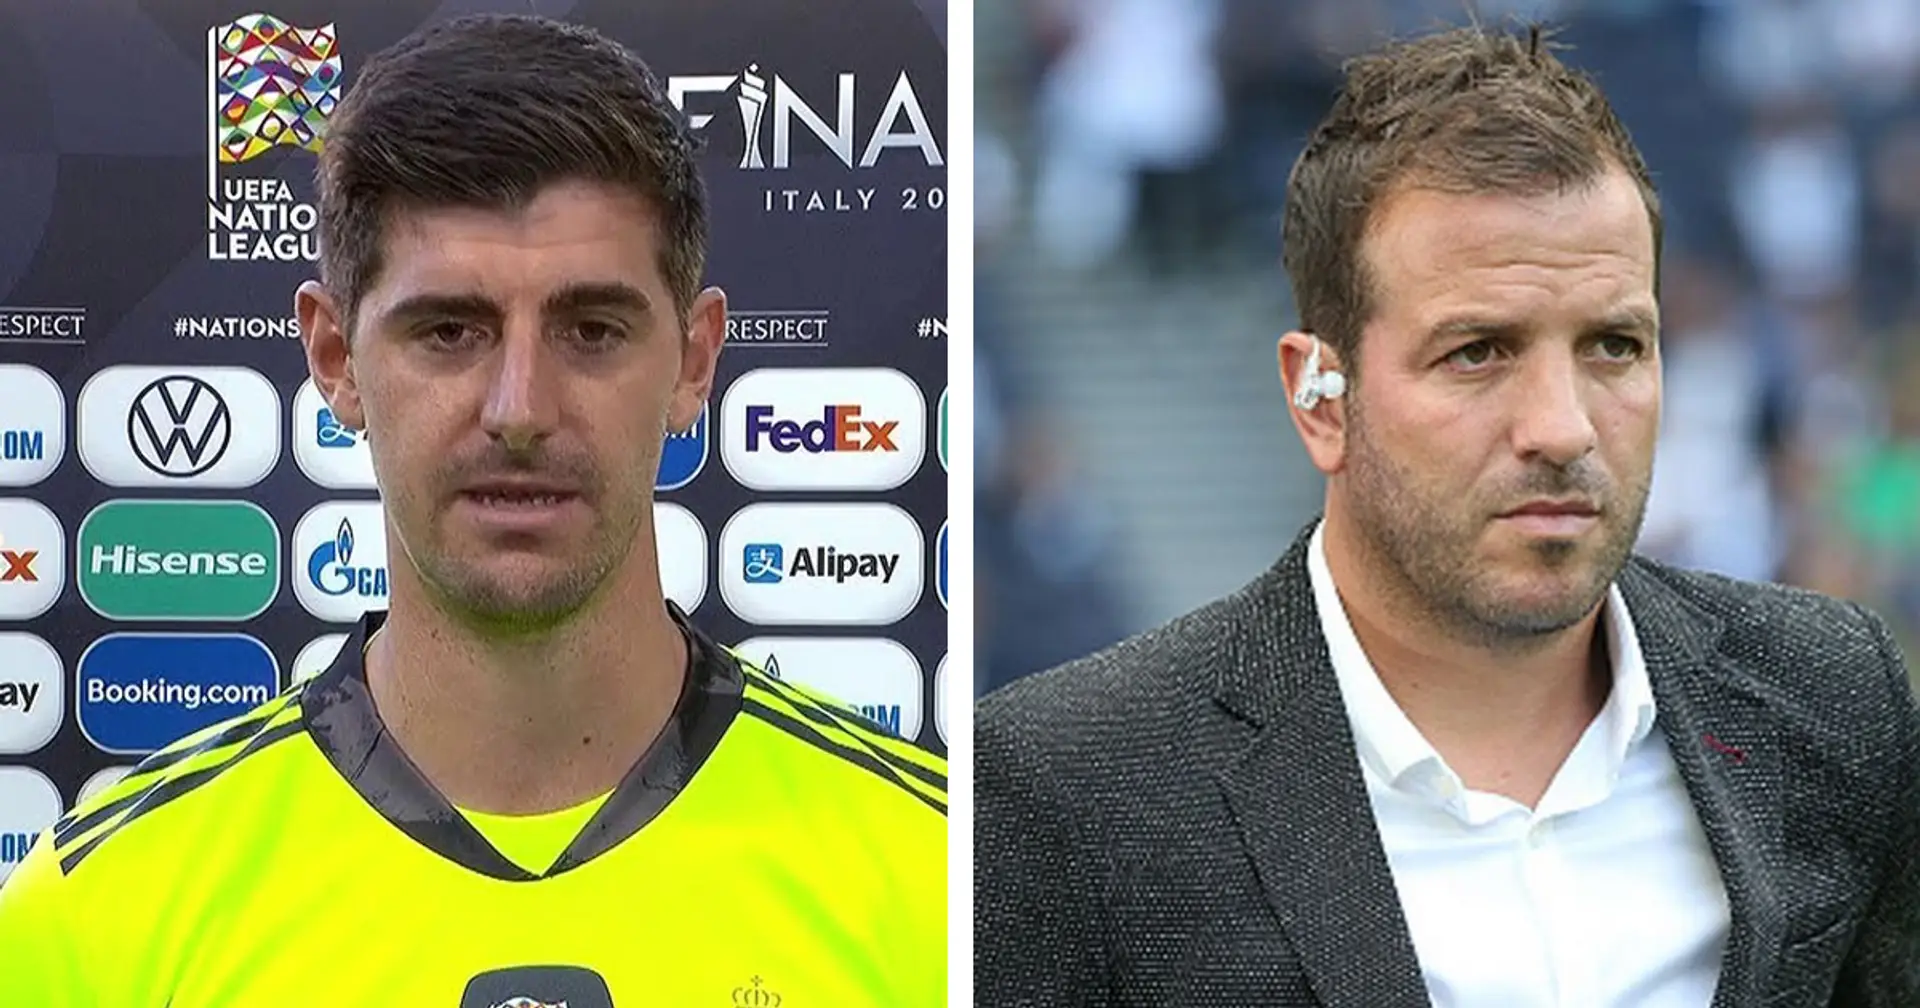 Van der Vaart slams Courtois for 'whining' about Nations League 